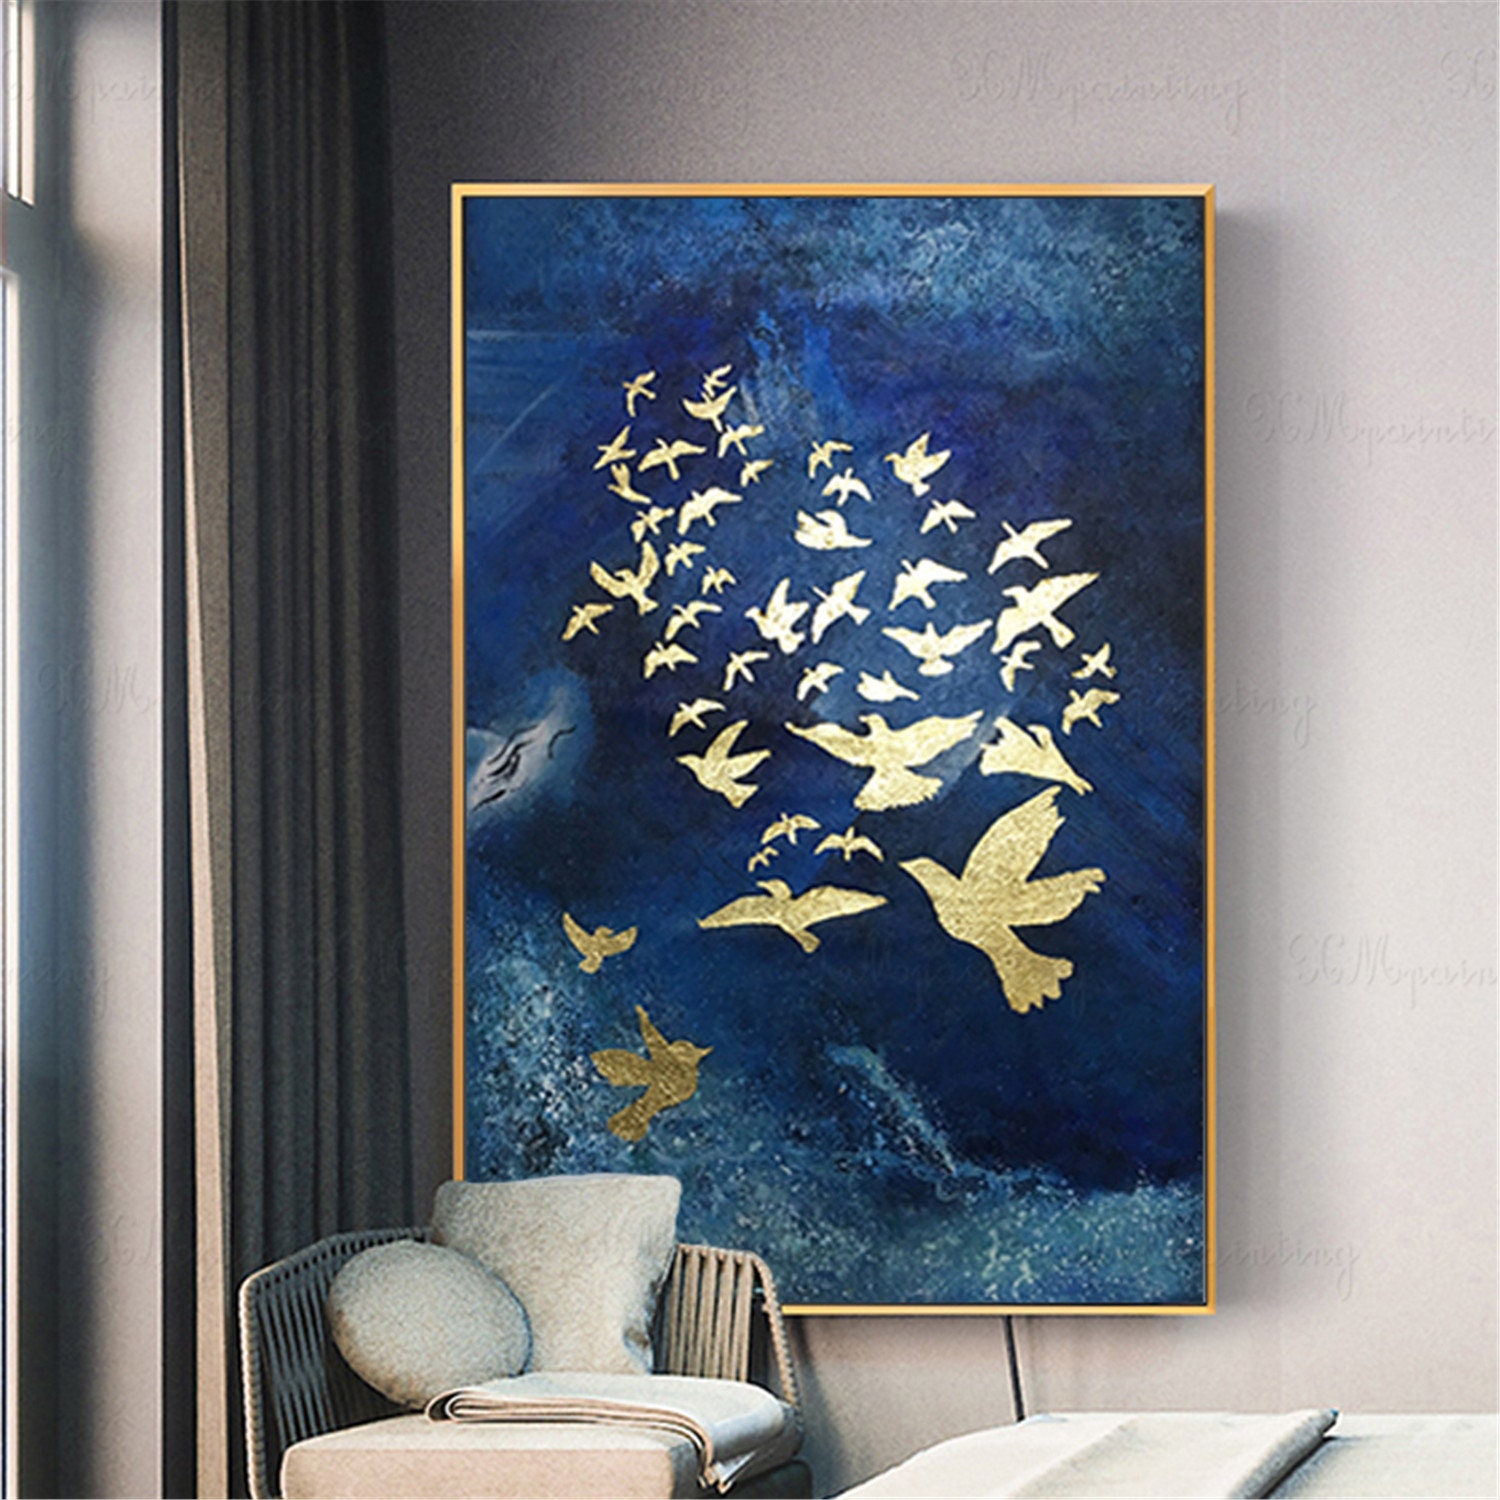 Golden Leaf Flower Abstract Canvas Wall Art Pictures For Living Room Home Decor